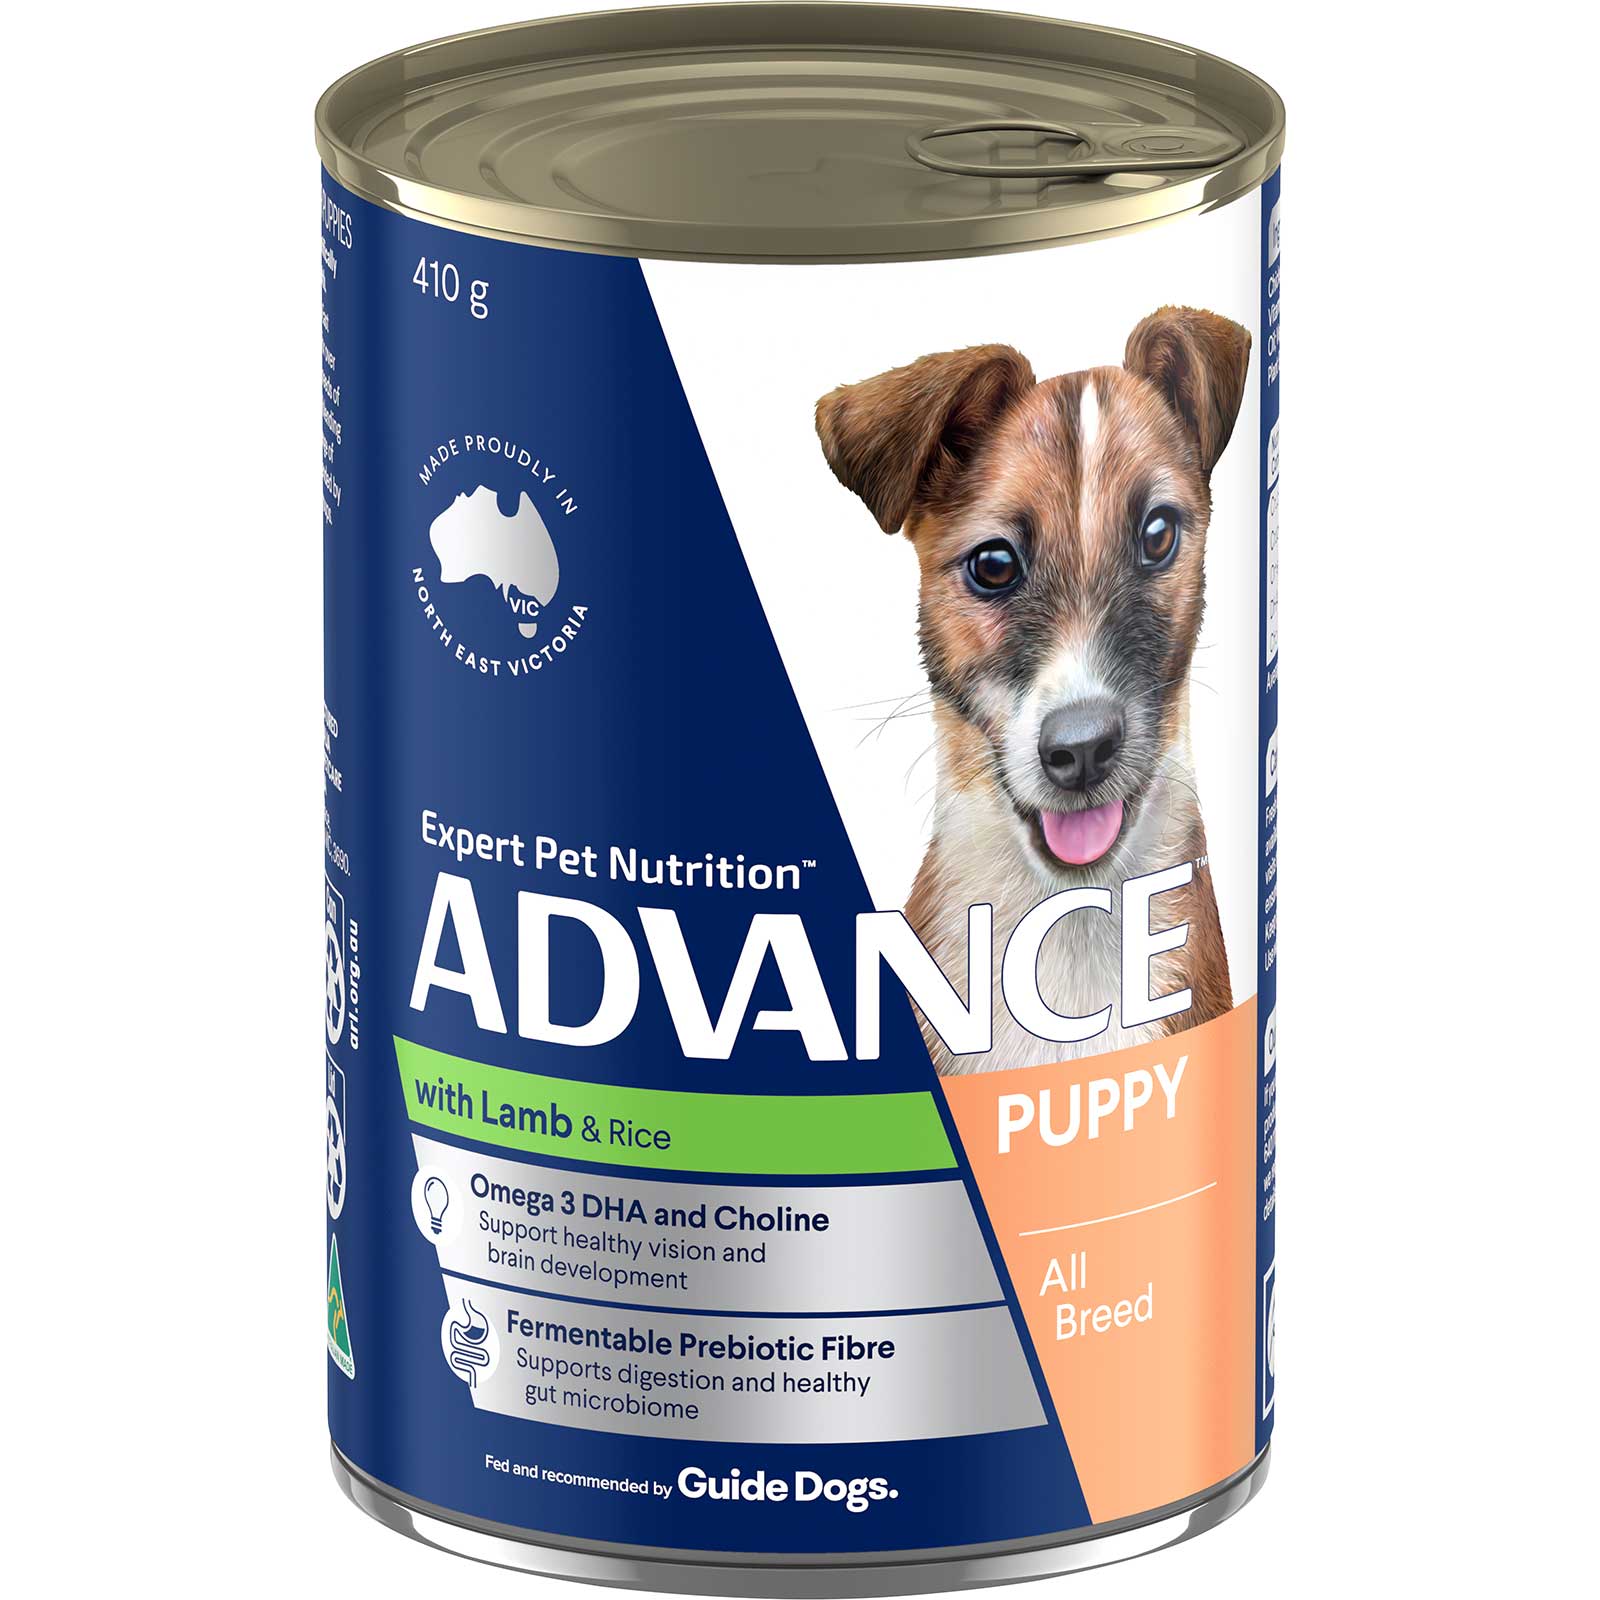 Advance Dog Food Can Puppy All Breed with Lamb & Rice